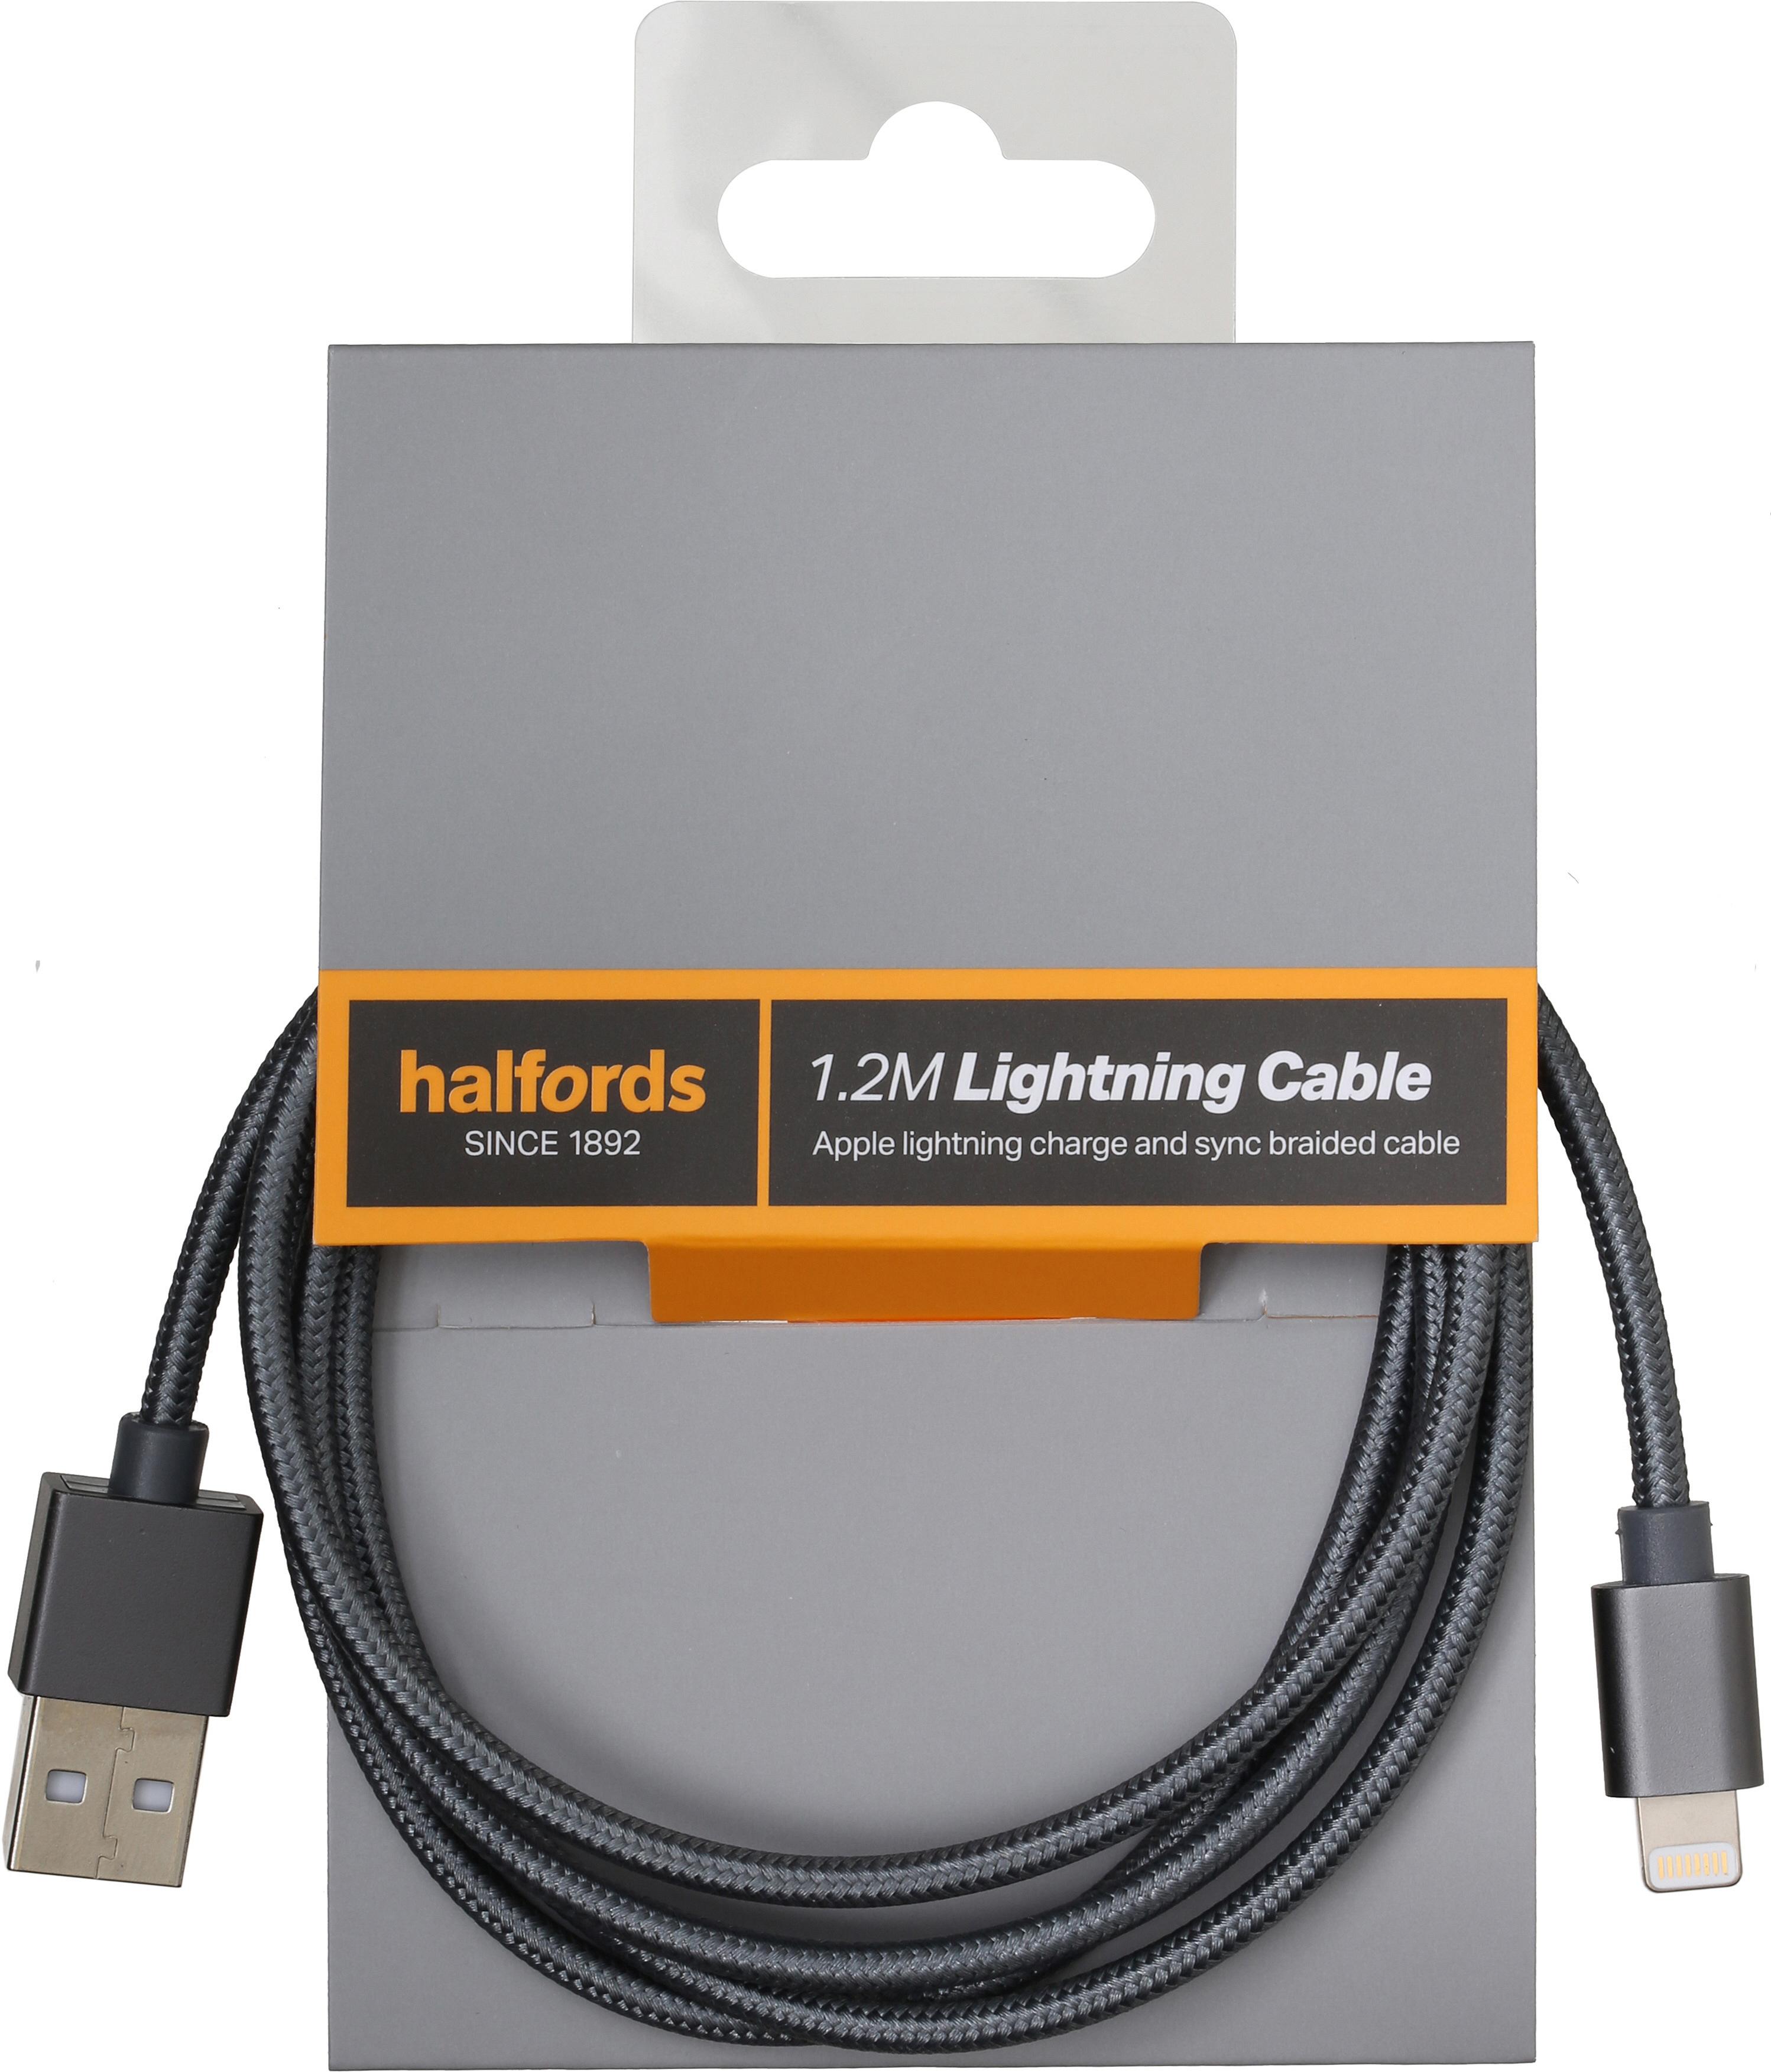 Halfords 1.2M Lightning Cable Charcoal